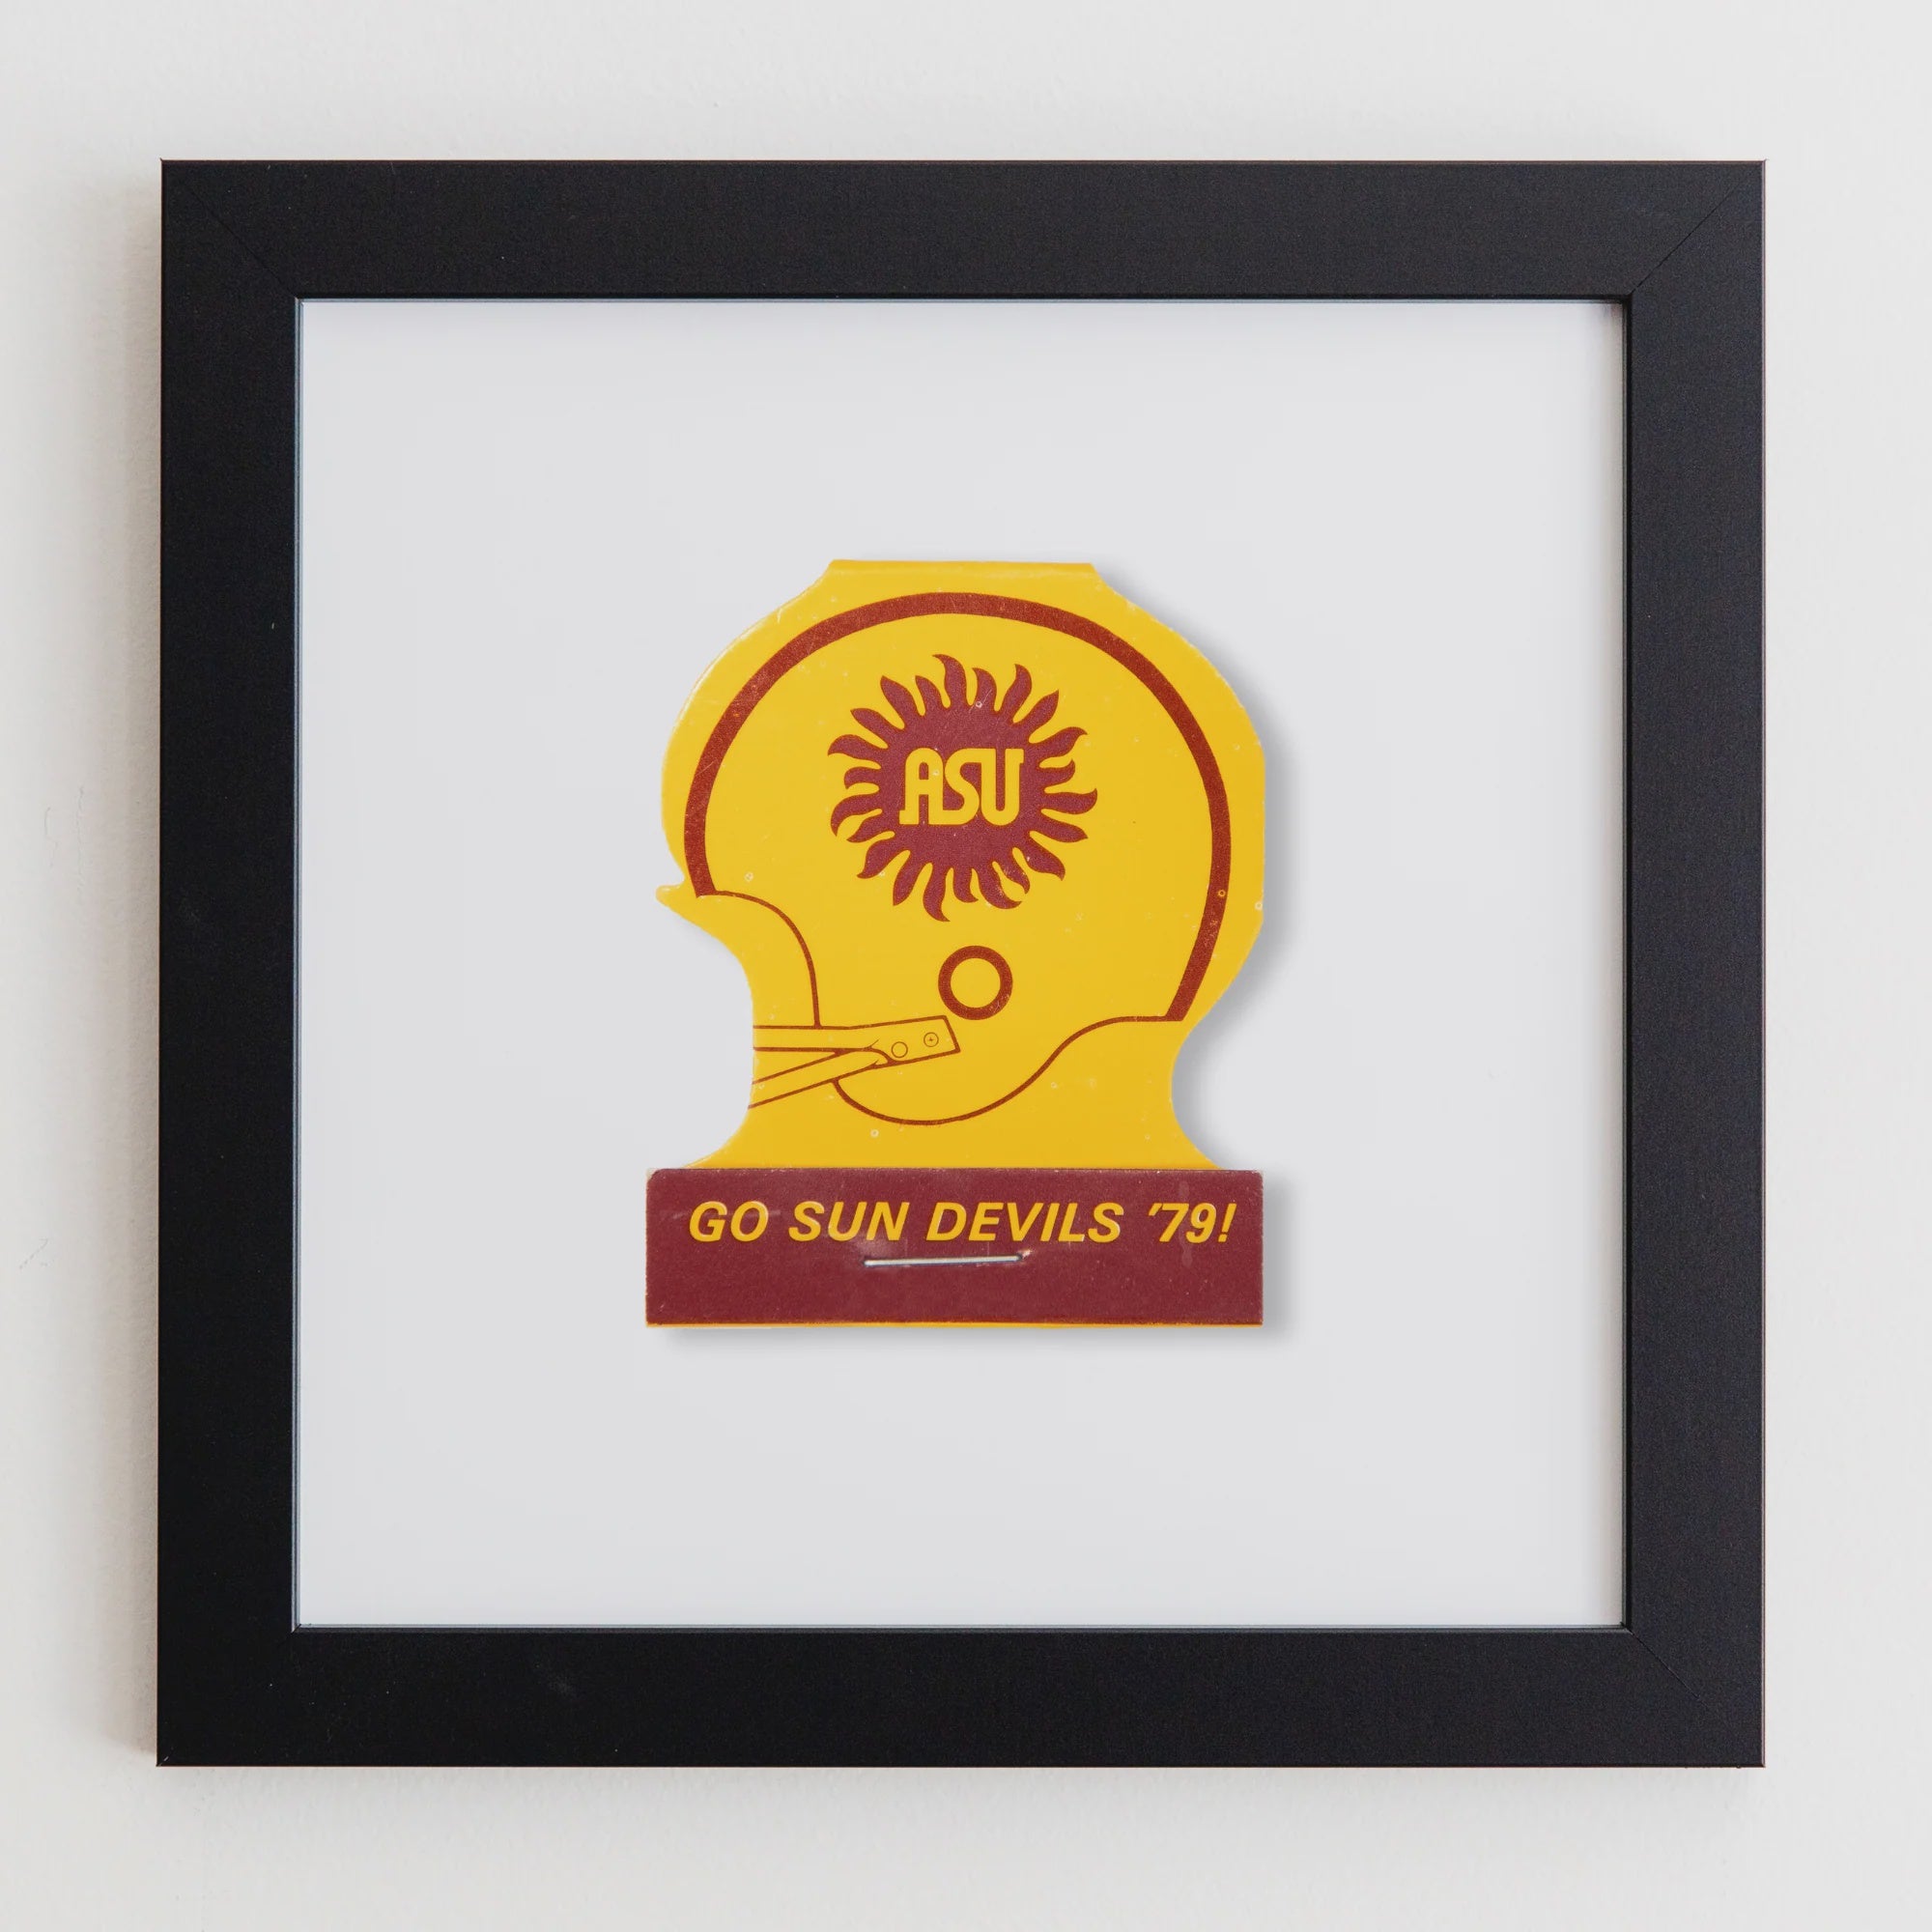 A framed acrylic image featuring a vibrant yellow and orange sunburst design inside a silhouette of a helmet, with the text &quot;GO SUN DEVILS 79!&quot; on a beige background in the Art Square Black Frame by Match South.